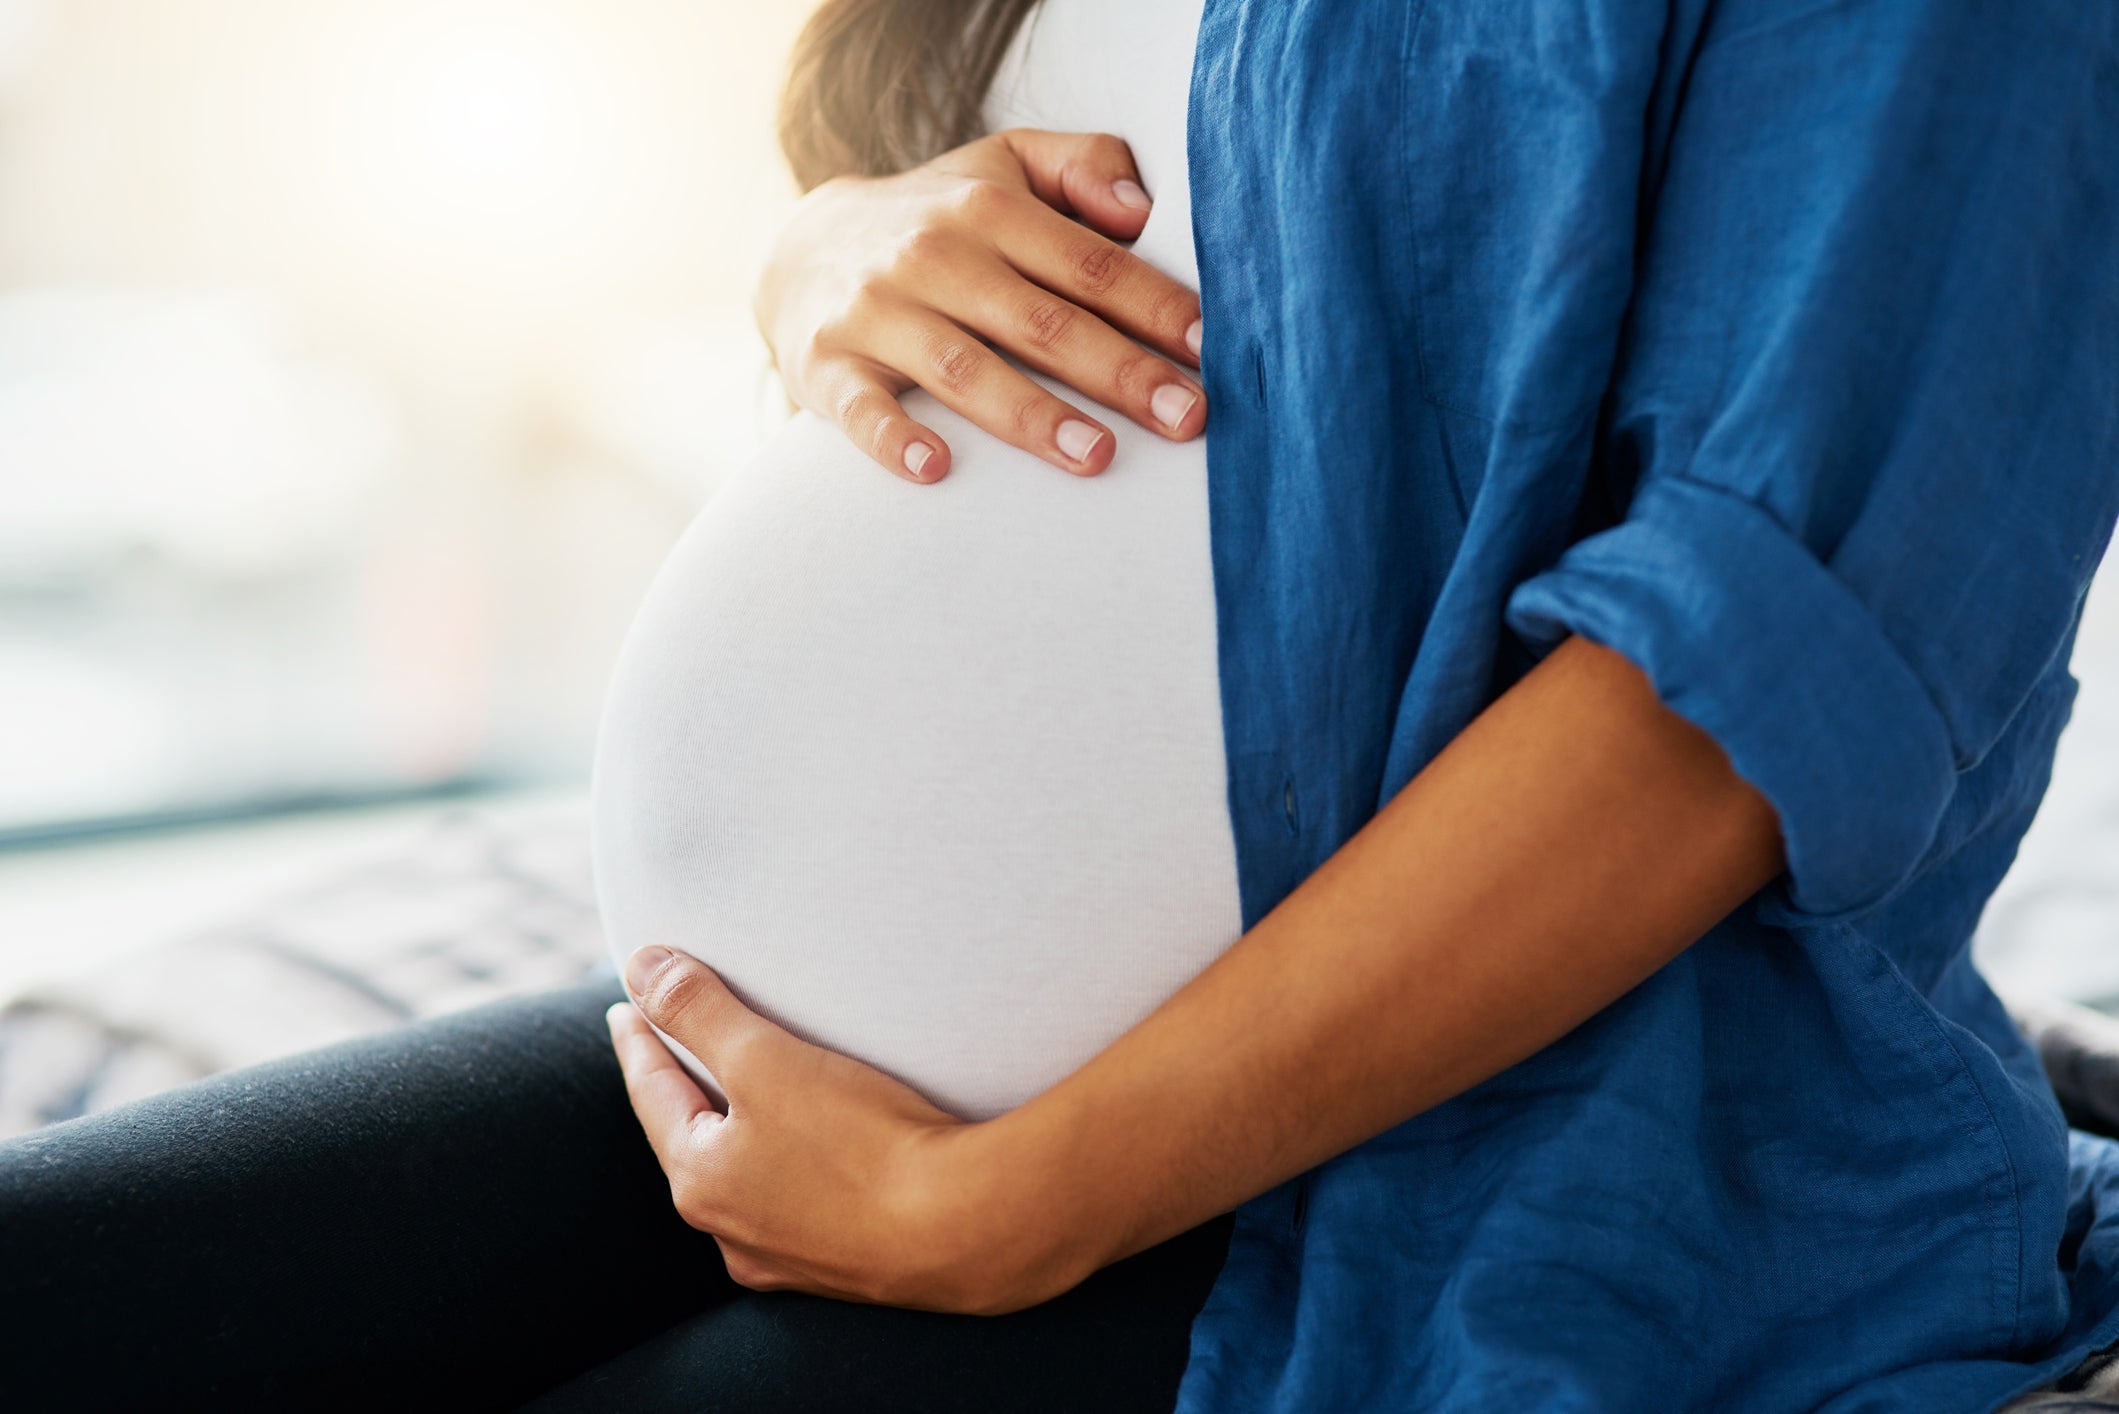 Pregnancy care on the NHS starts at around £7,000 and is a legal requirement for migrant women